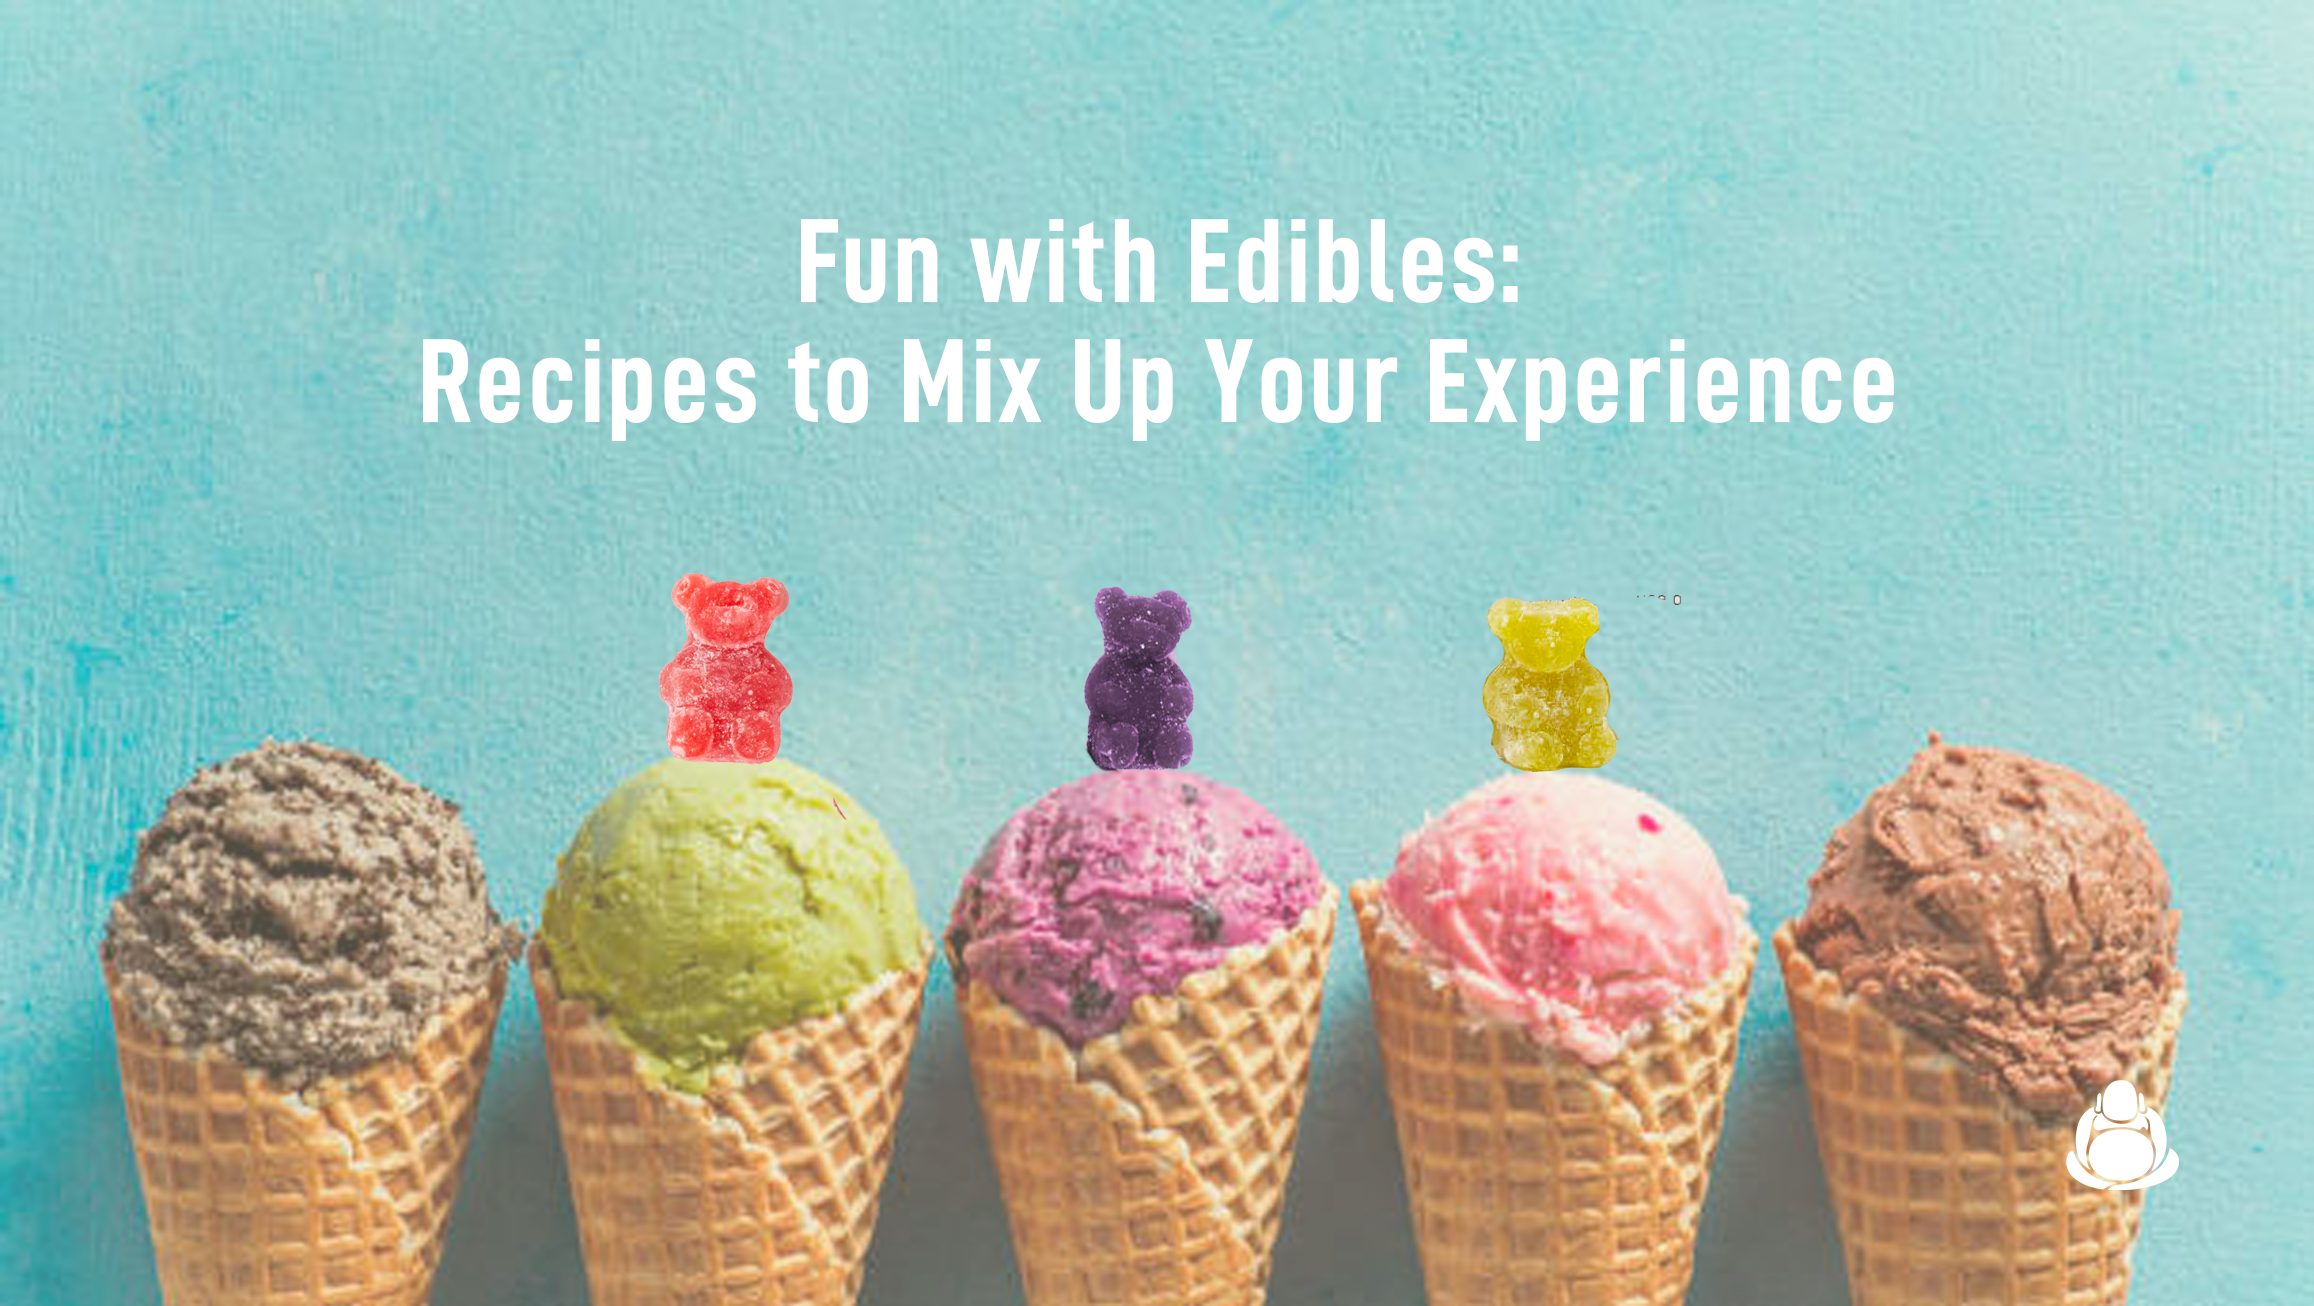 Fun with Edibles: Recipes to Mix up your Experience